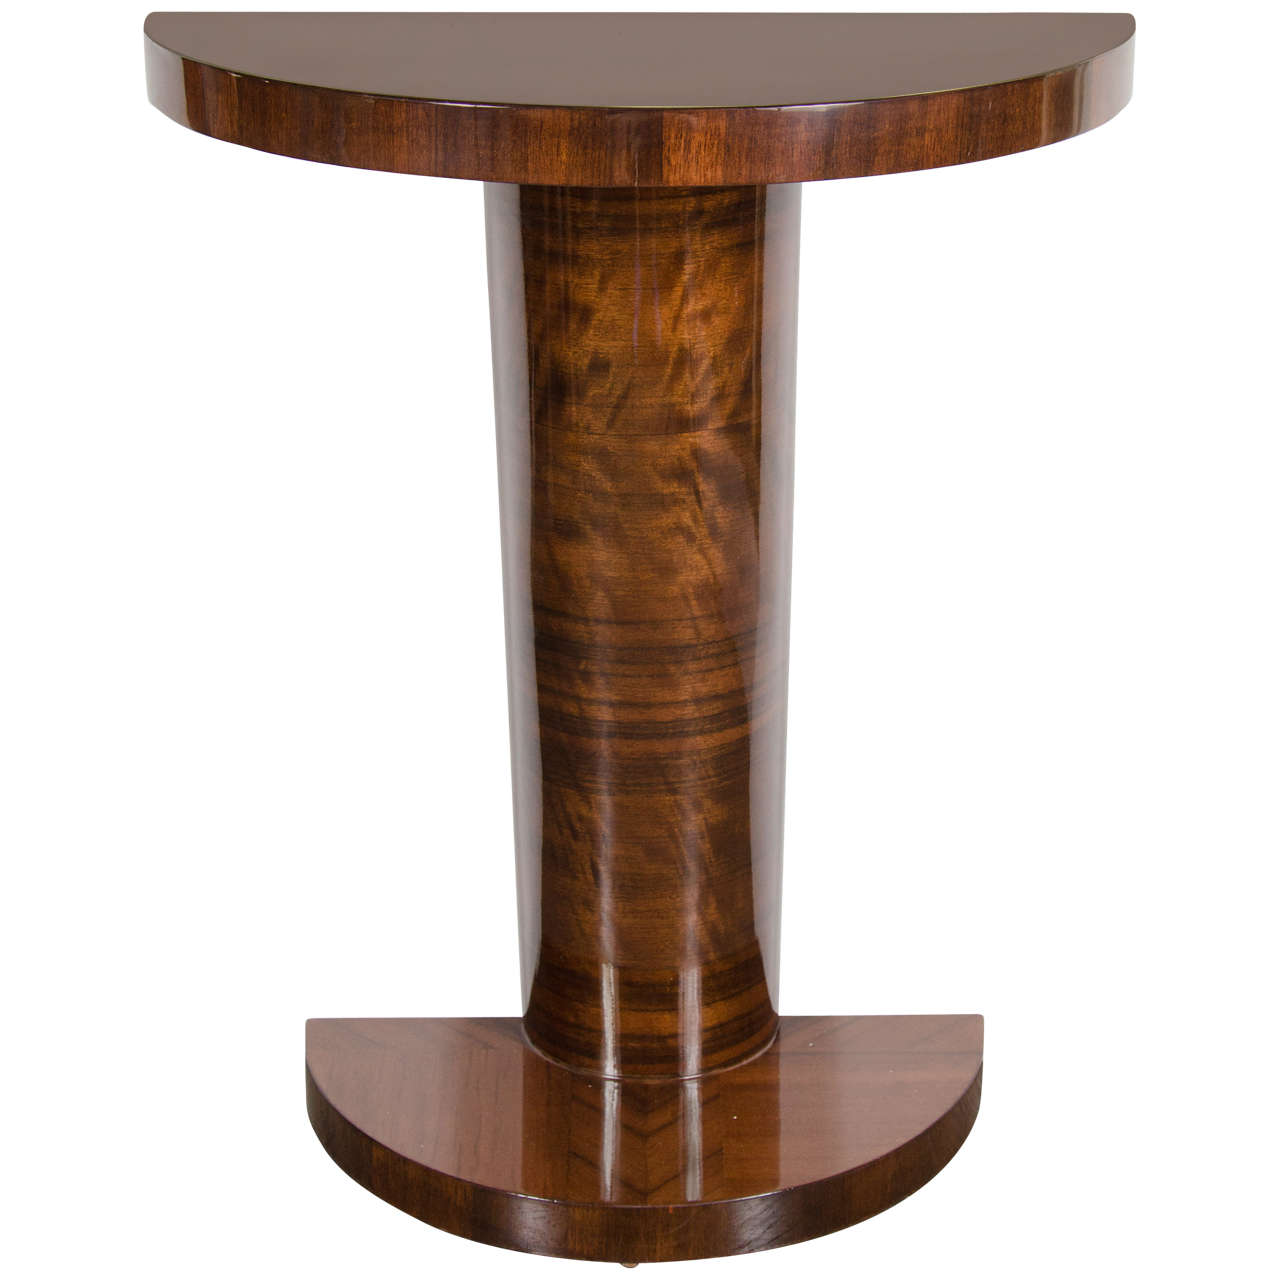 Art Deco Console or Demilune  Table with Chevron Inlay in Book-Matched Walnut